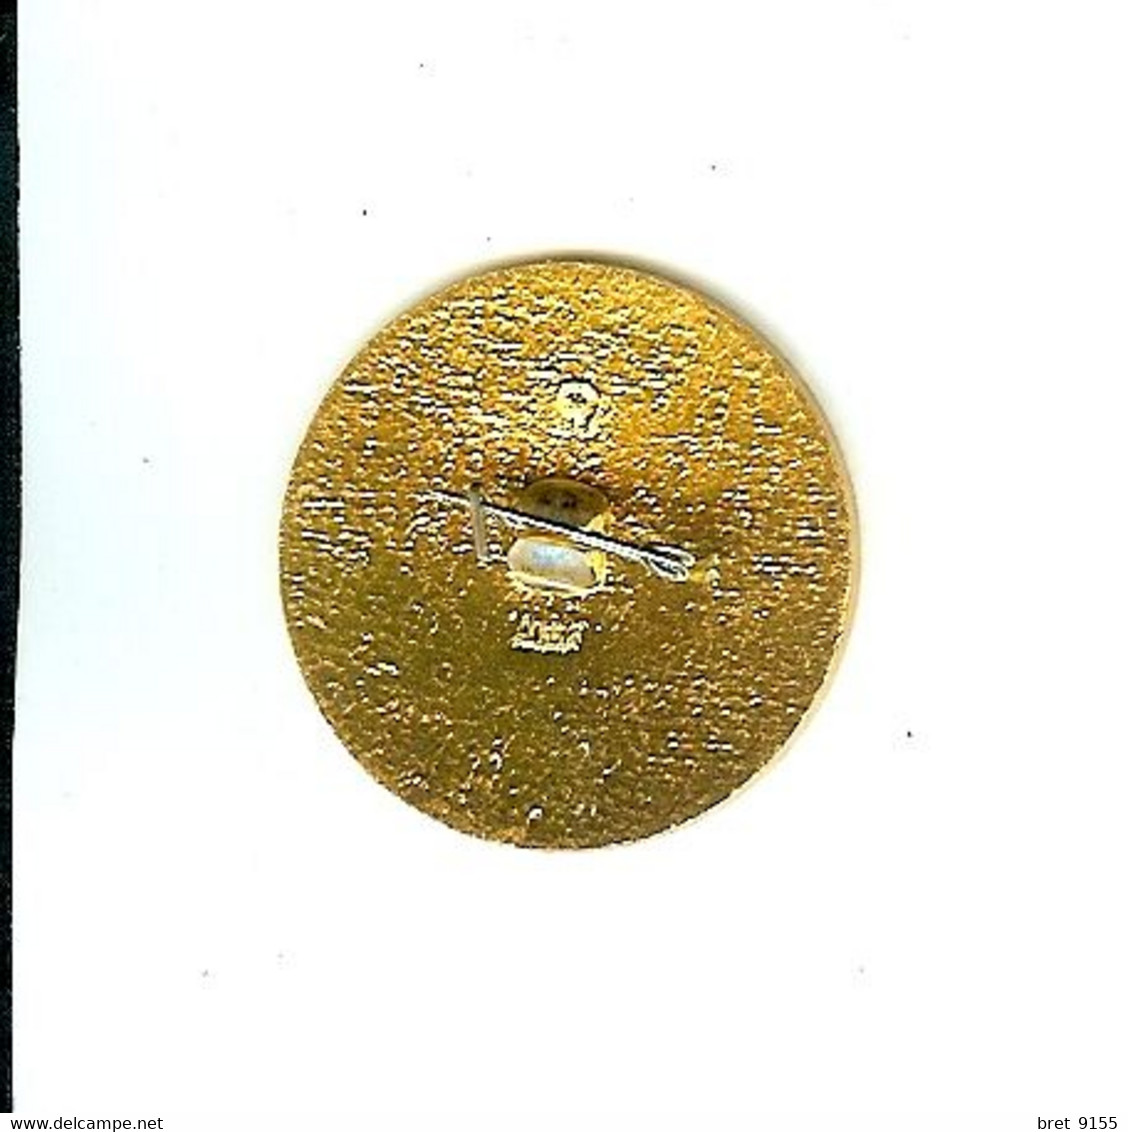 PINS BROCHE PIN S JEUX OLYMPIQUES CCCP RUSSIE - Olympic Games